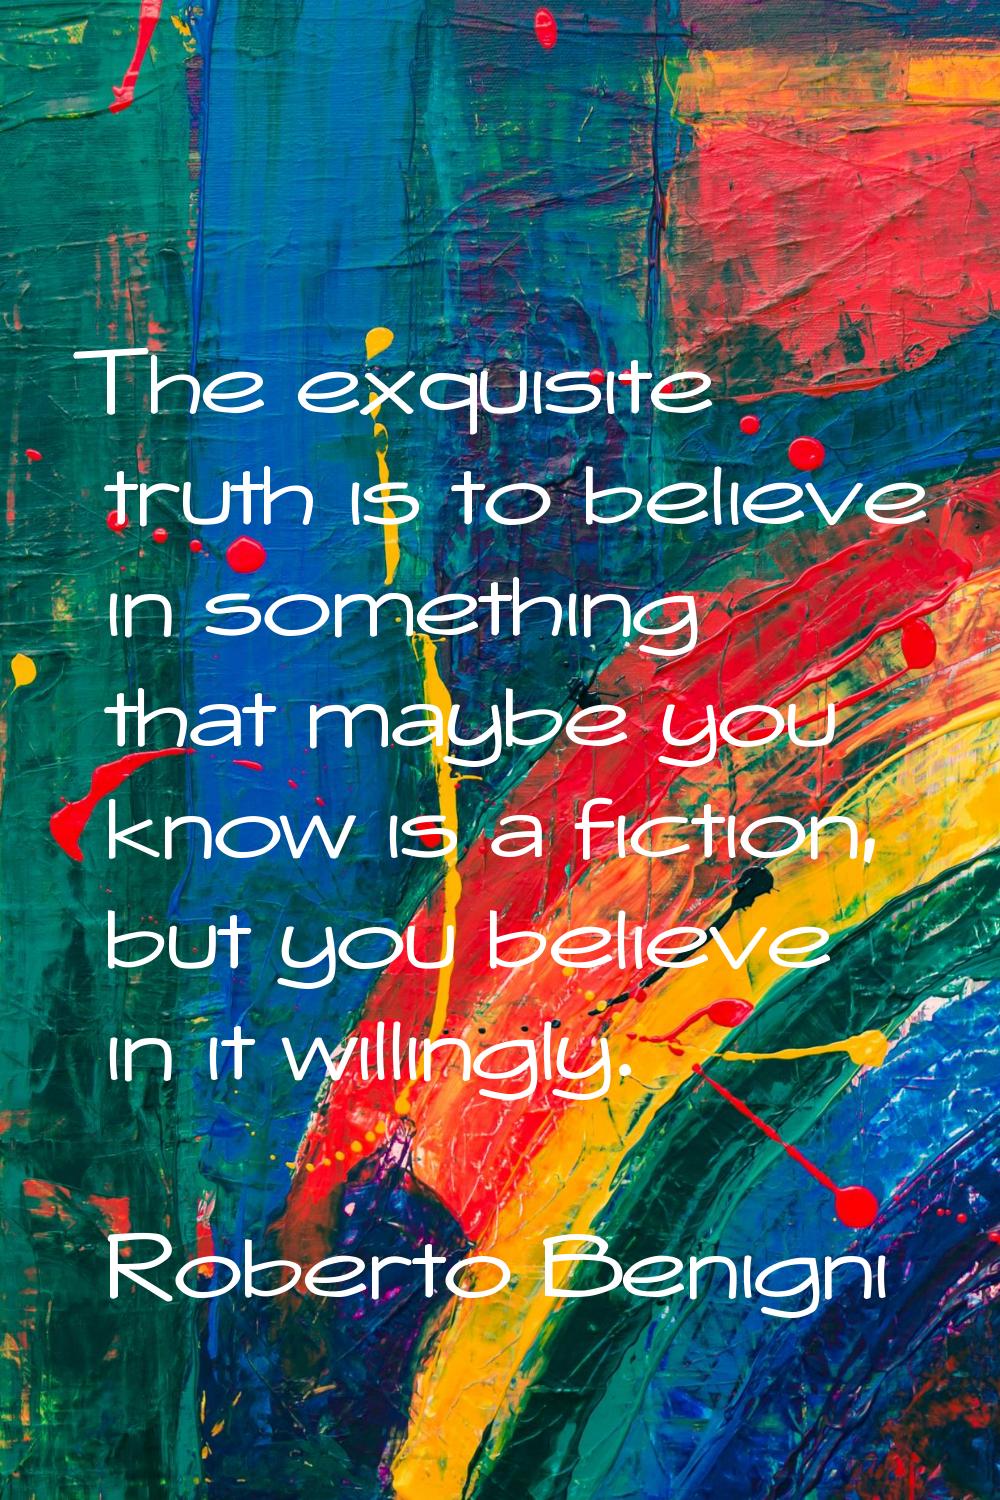 The exquisite truth is to believe in something that maybe you know is a fiction, but you believe in